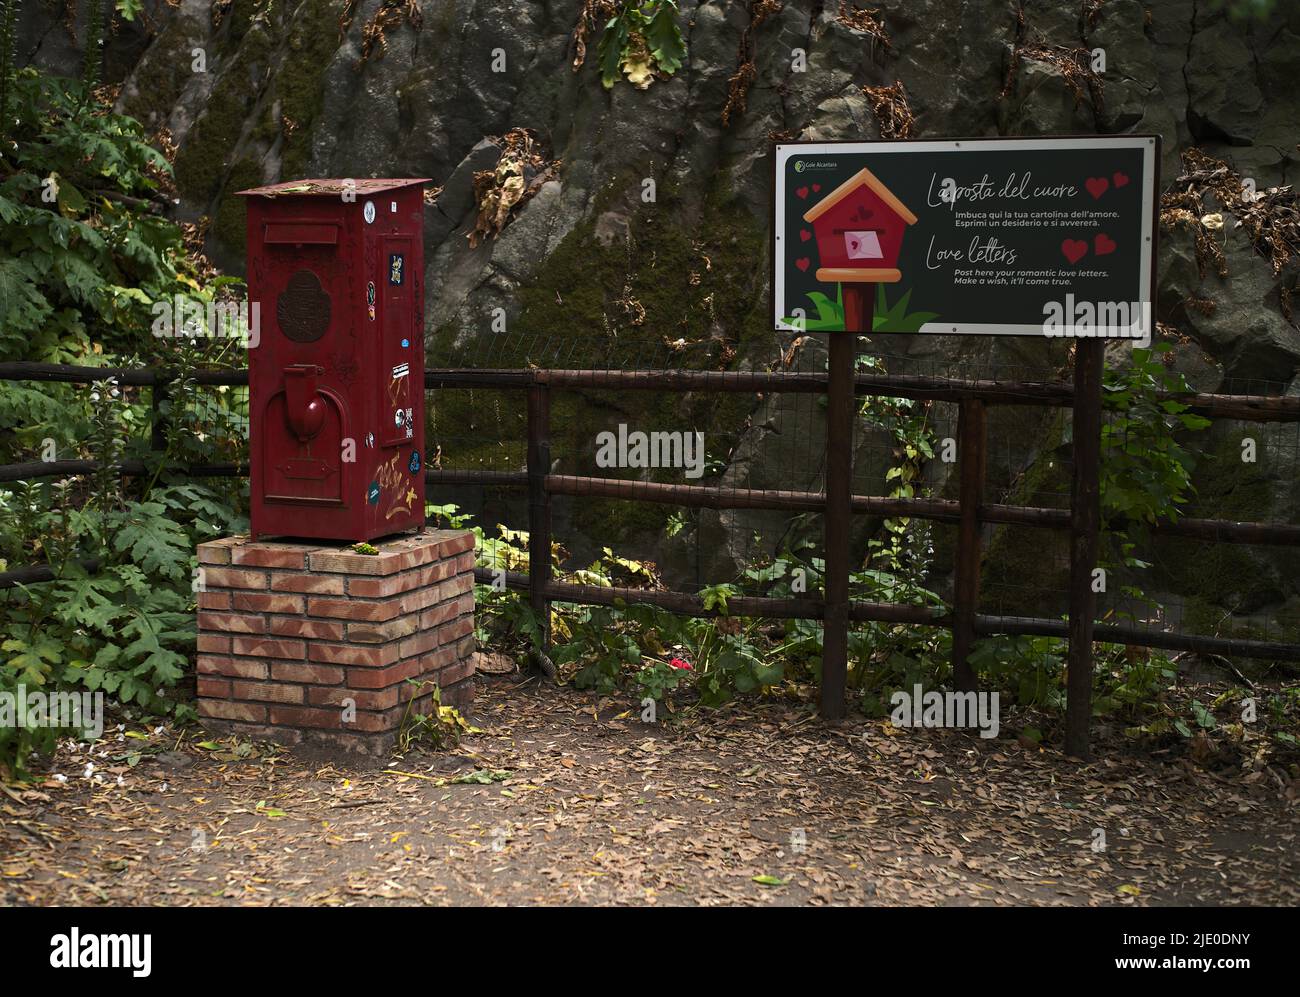 Sign and letterbox for love letters, Gole dell' Alcantara river park, Alcantara gorge, Sicily, Italy, Europe Stock Photo